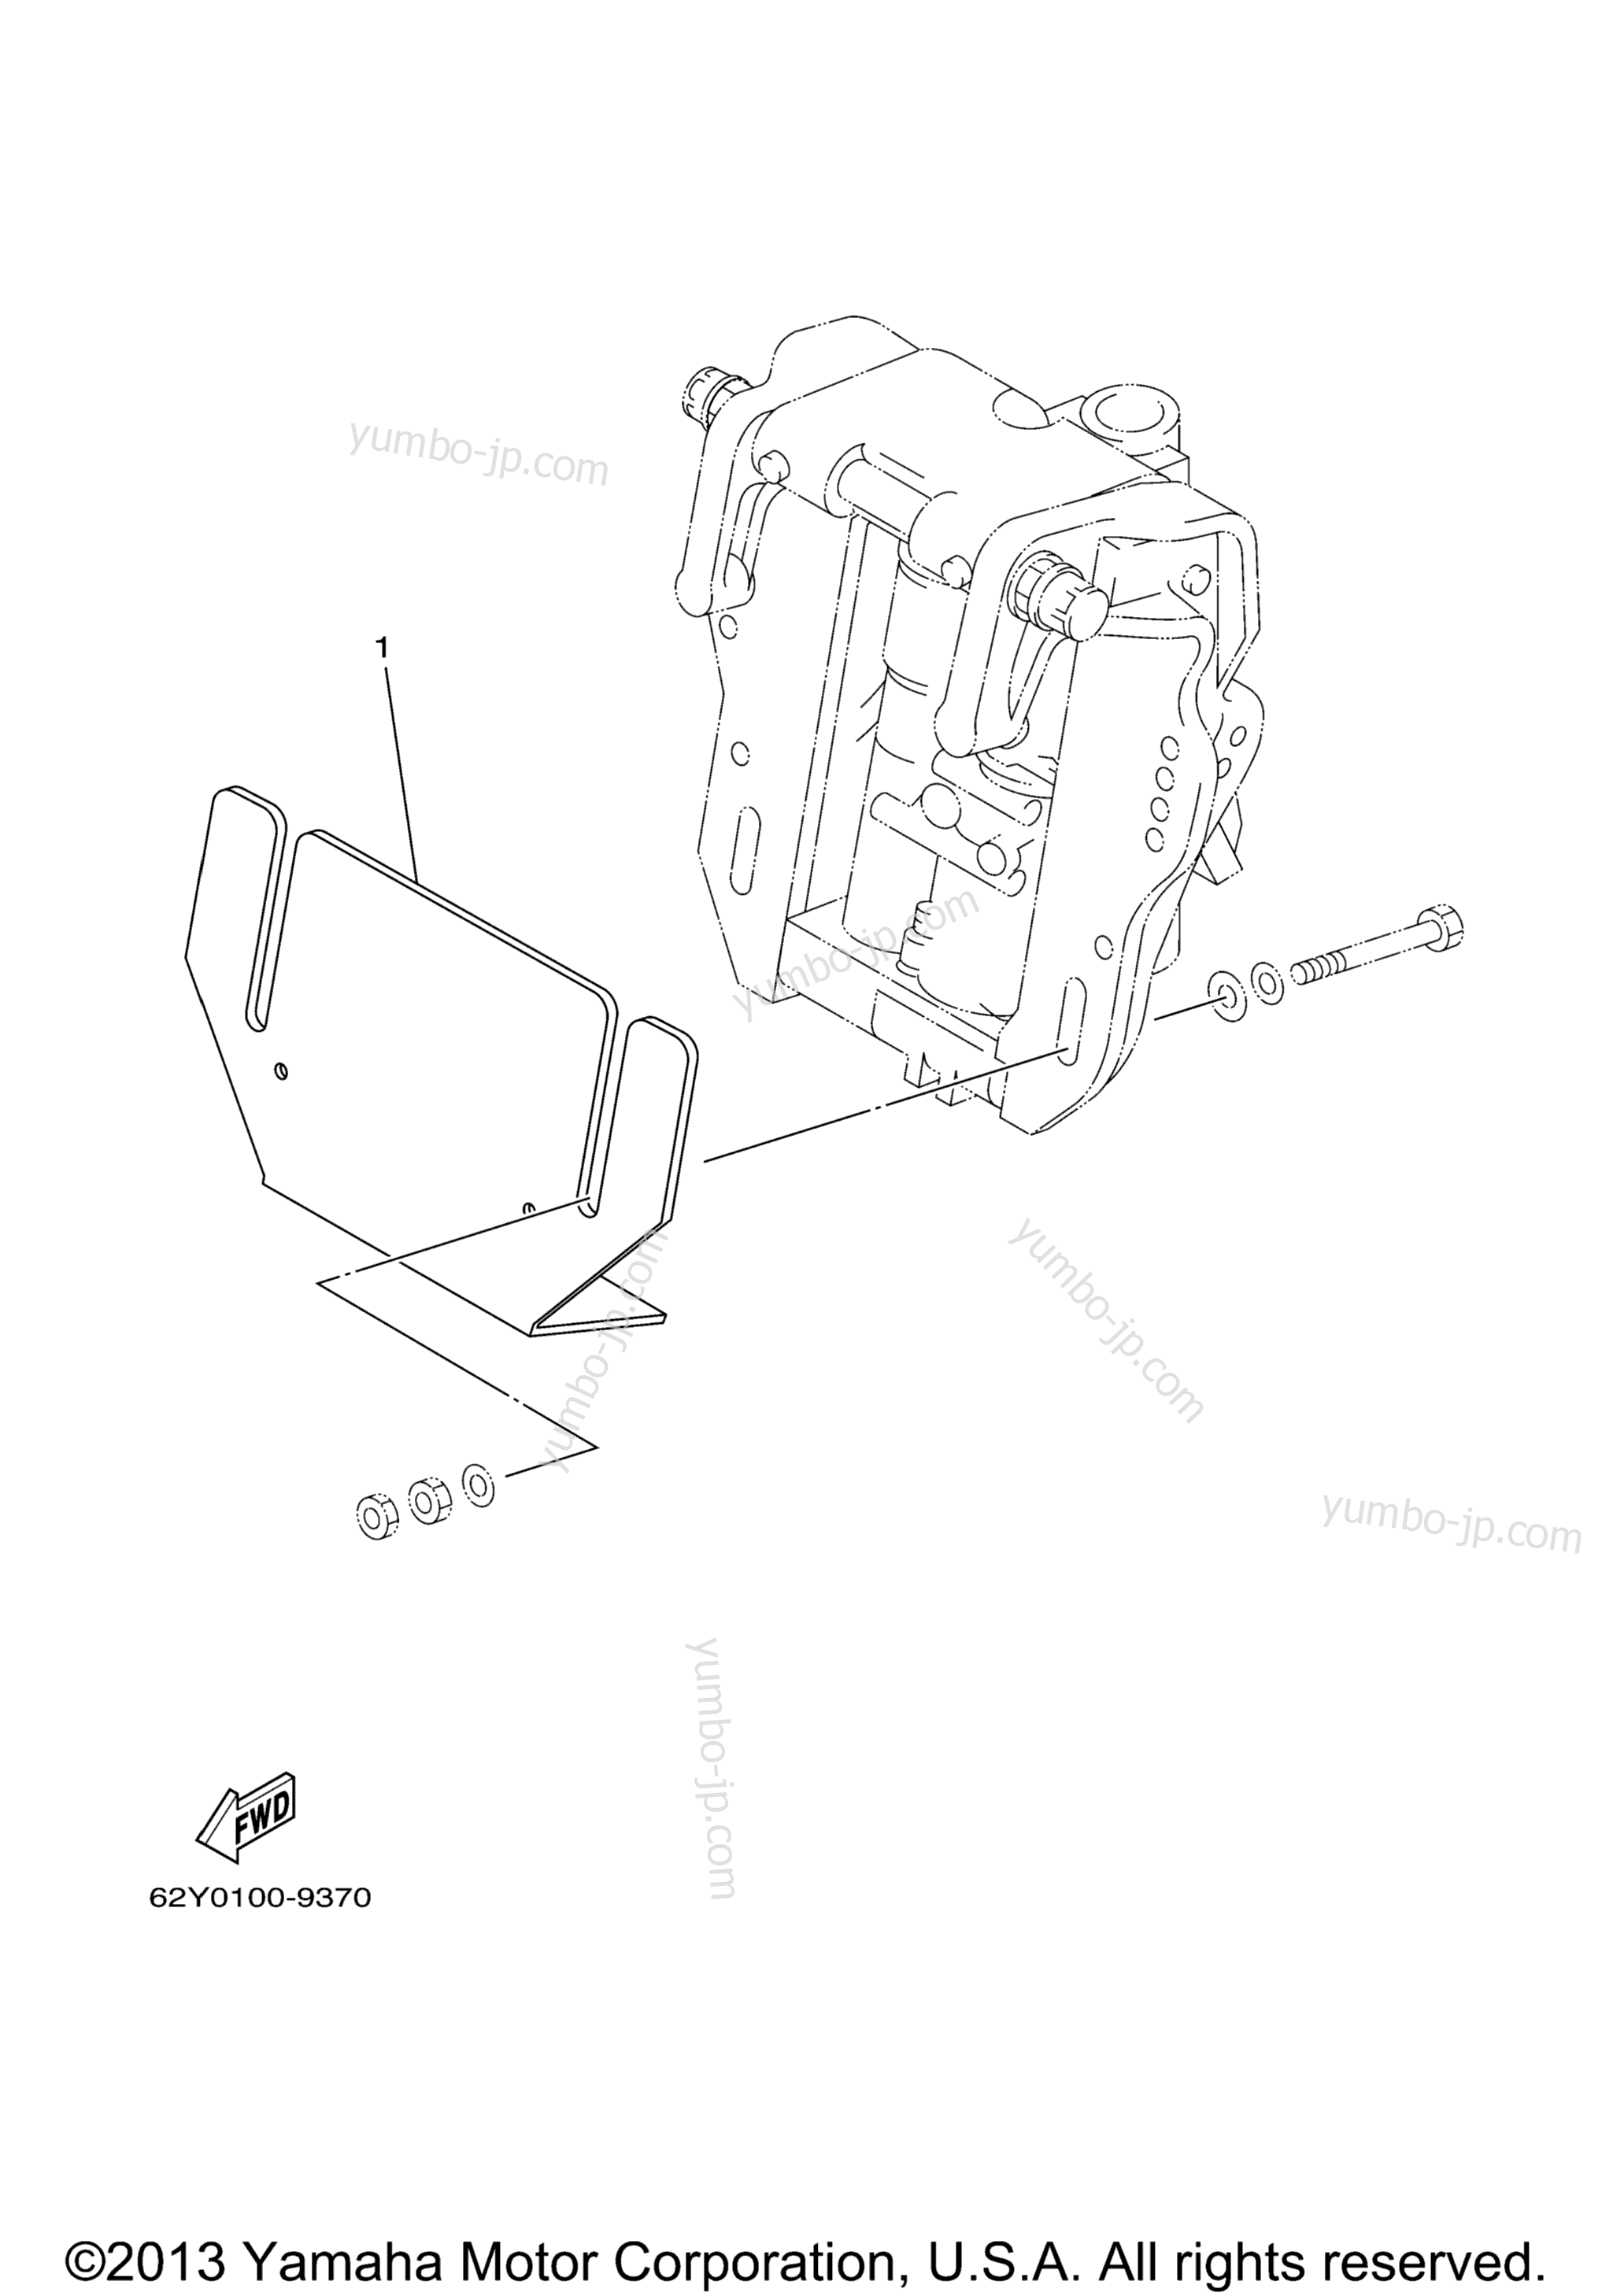 OPTIONAL PARTS for outboards YAMAHA T50TLRC 2004 year